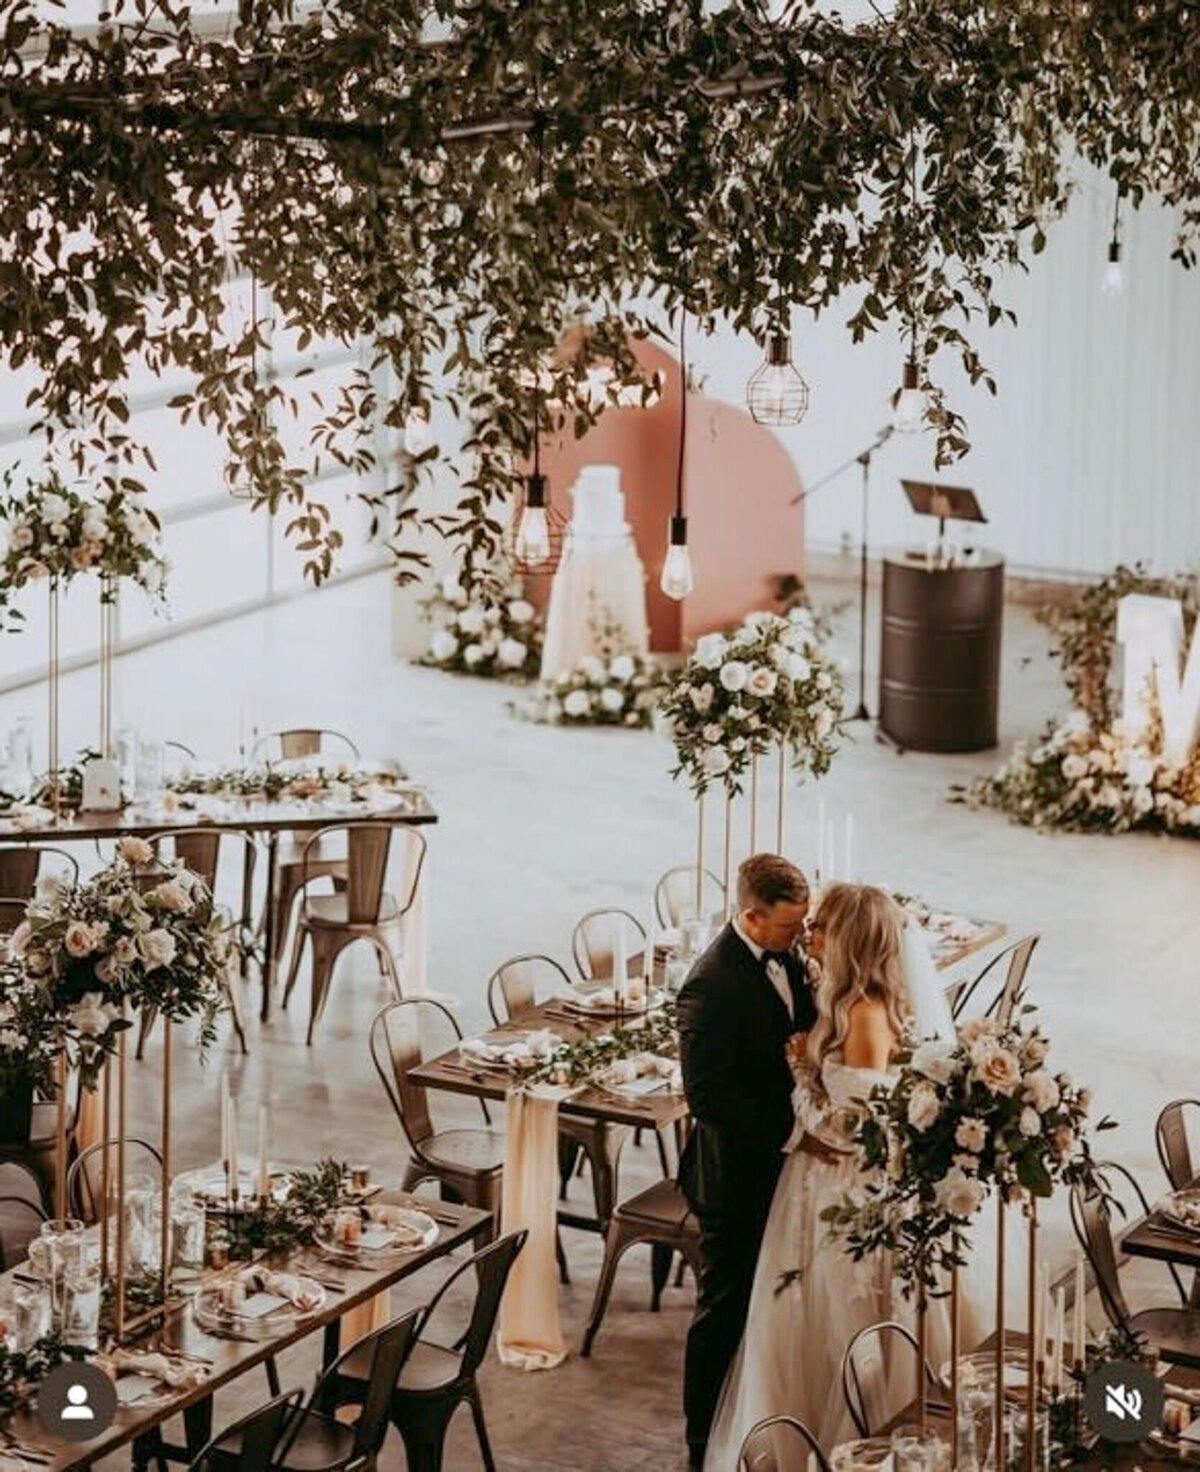 Stunning reception hanging floral installation by Calyx Floral Design, an innovative Red Deer, Alberta wedding florist, featured on the Brontë Bride Vendor Guide.